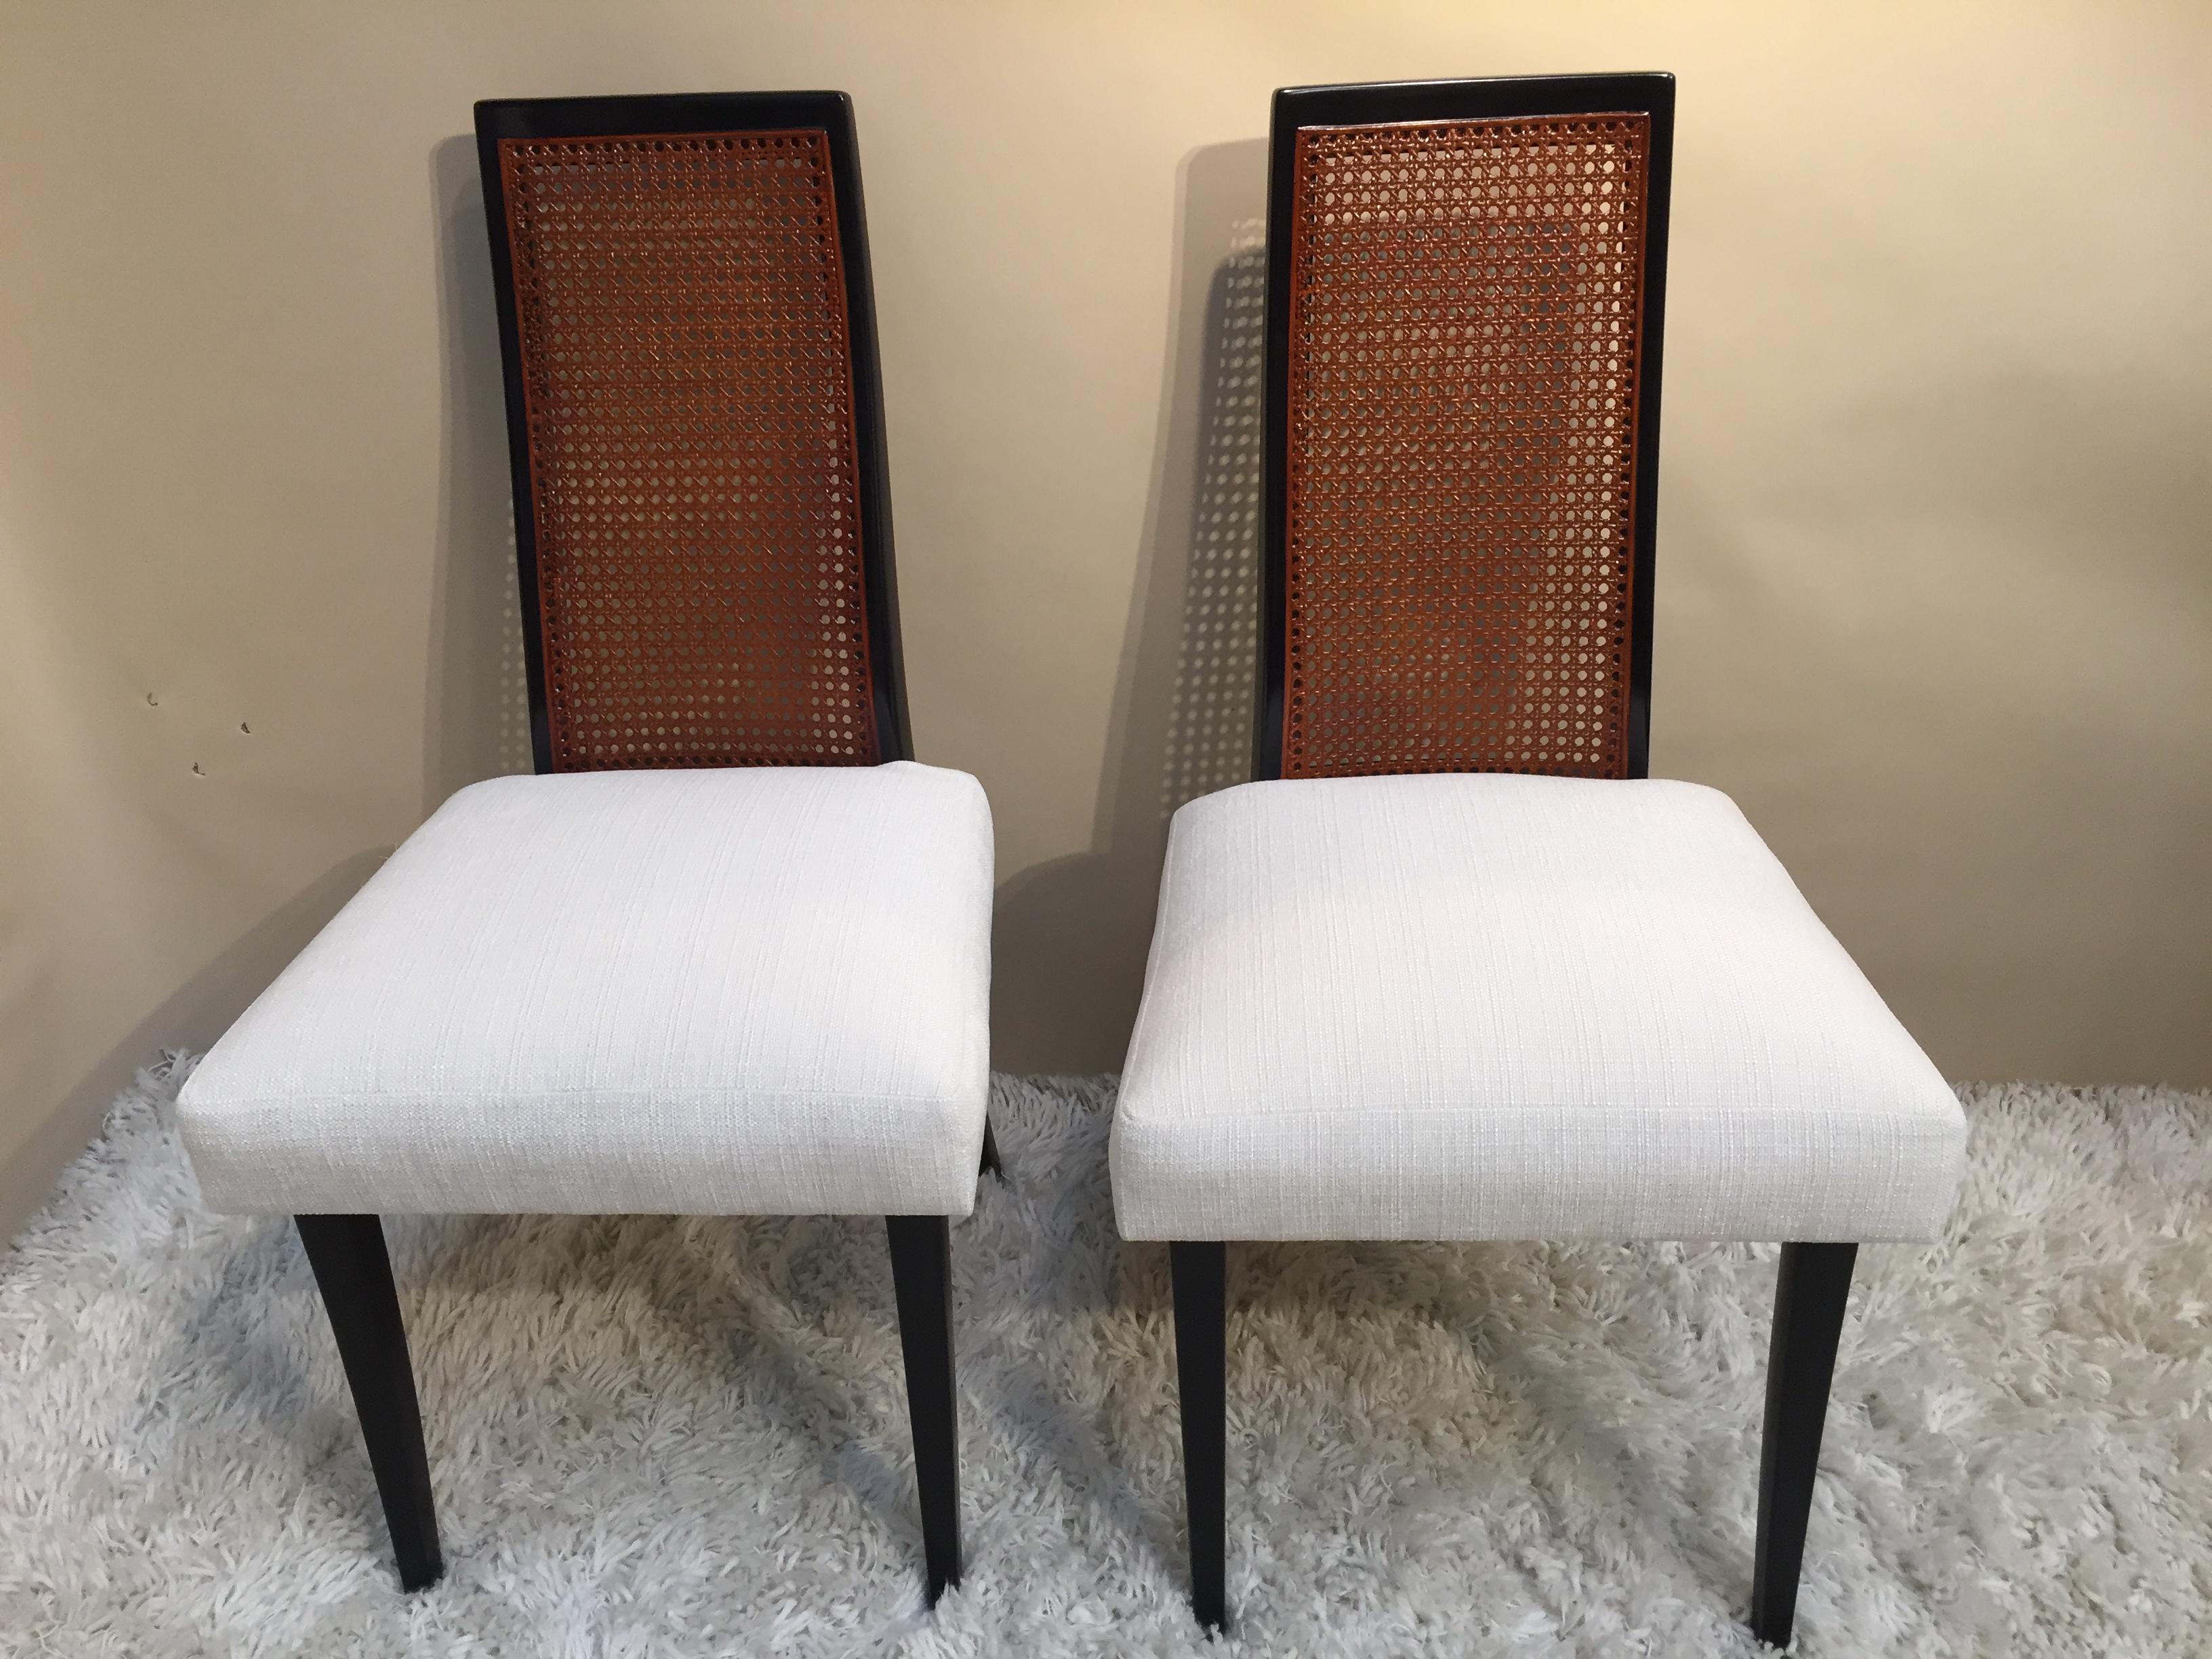 Harvey Probber tall high cane back chairs, dark walnut finish off white chenille fabric, saber leg design. Probber was born in Brooklyn, New York in 1922. While attending high school, he took a part-time job in a used-furniture store, and was